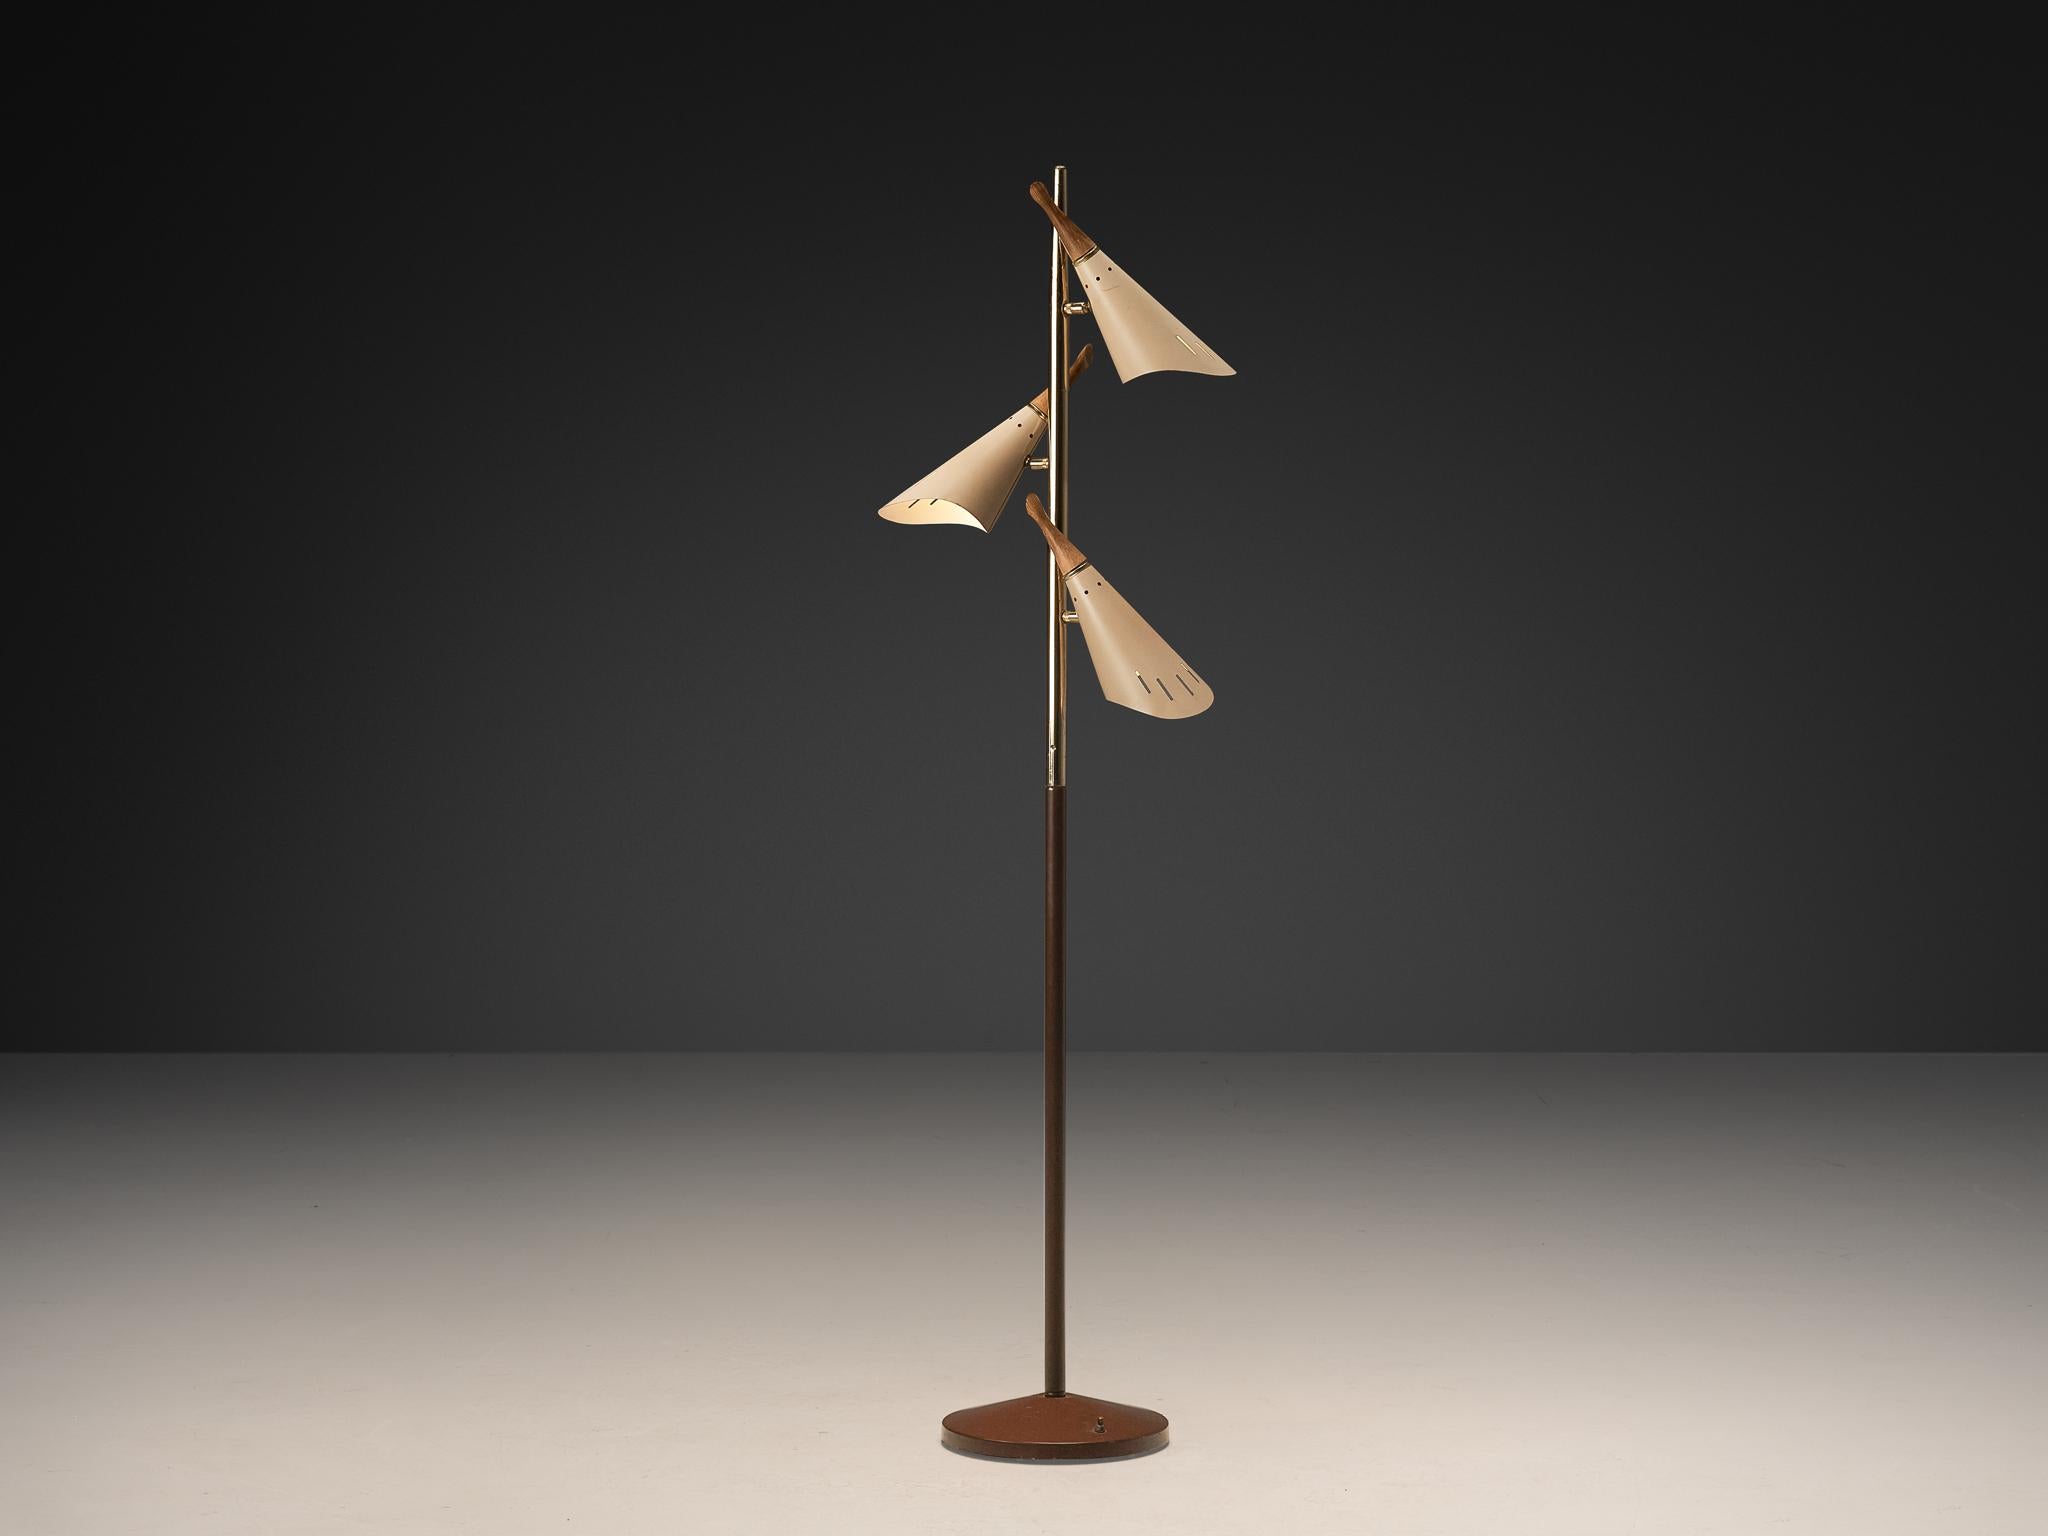 Floor lamp, coated aluminum, brass-plated iron, coated iron, wood, Europe, 1950s

This floor lamp embodies modern elegance with its trio of distinctively contoured beige shades. A slender stem rises from a sturdy round base, coated in rich brown,